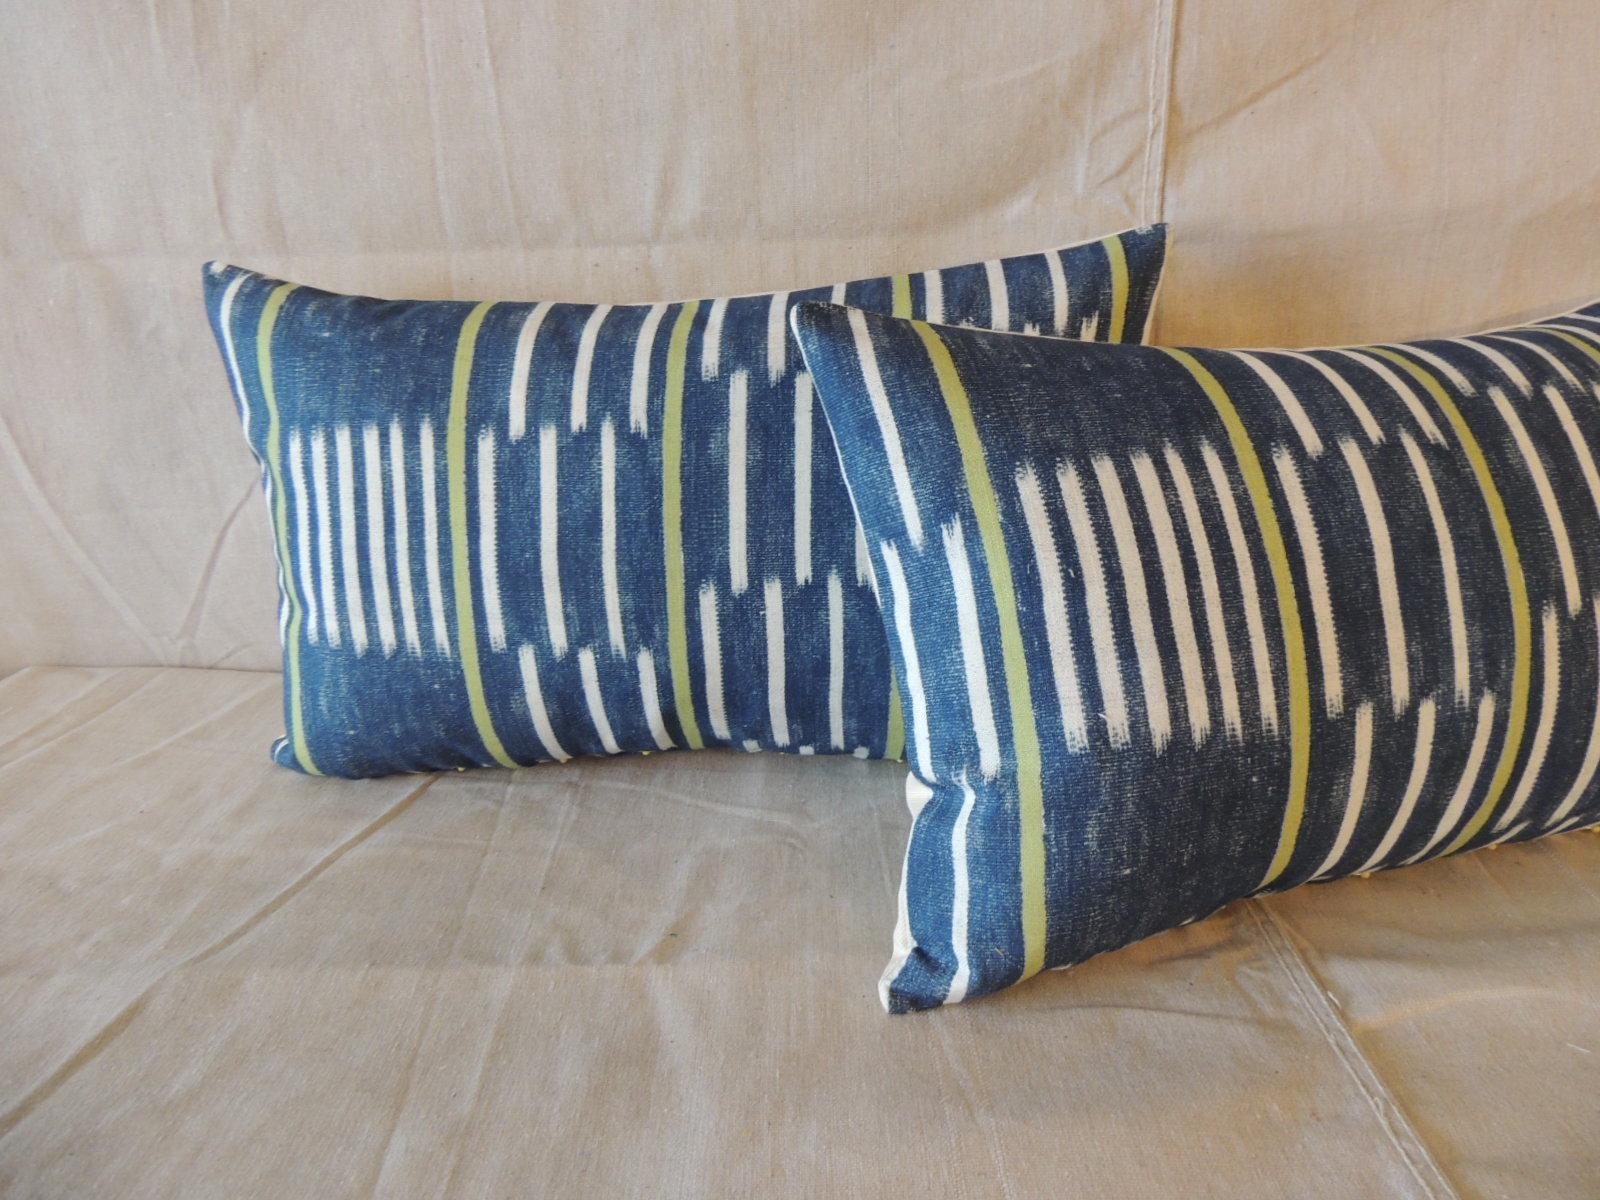 Pair of blue and white Ikat style modern lumbar decorative pillows.
Natural cotton backings.
Decorative pillows handcrafted in Portugal.
Zipper closure with custom-made pillow inserts.
Size: 12